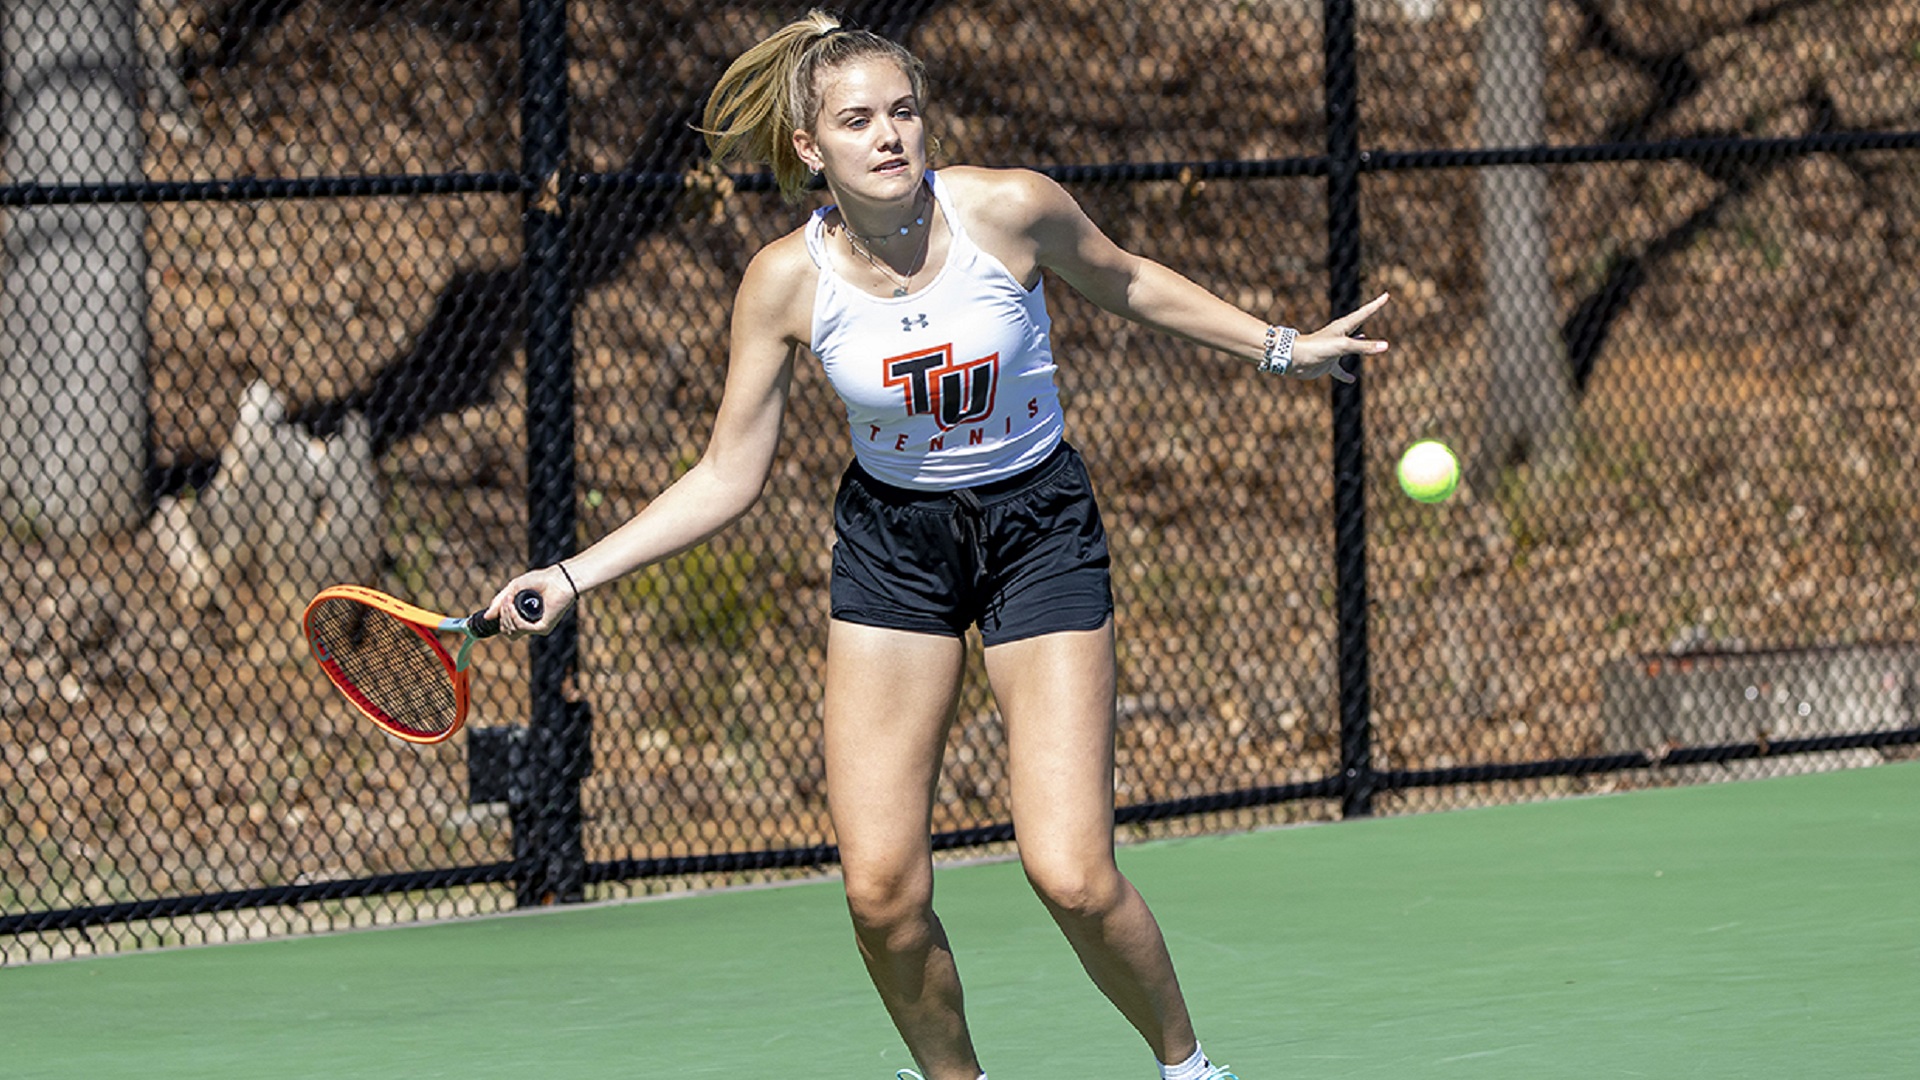 Leonie Floeth defeated 49th-ranked Anna Greer in singles in the Pioneers' 4-3 win over Anderson (photo by Chuck Williams)